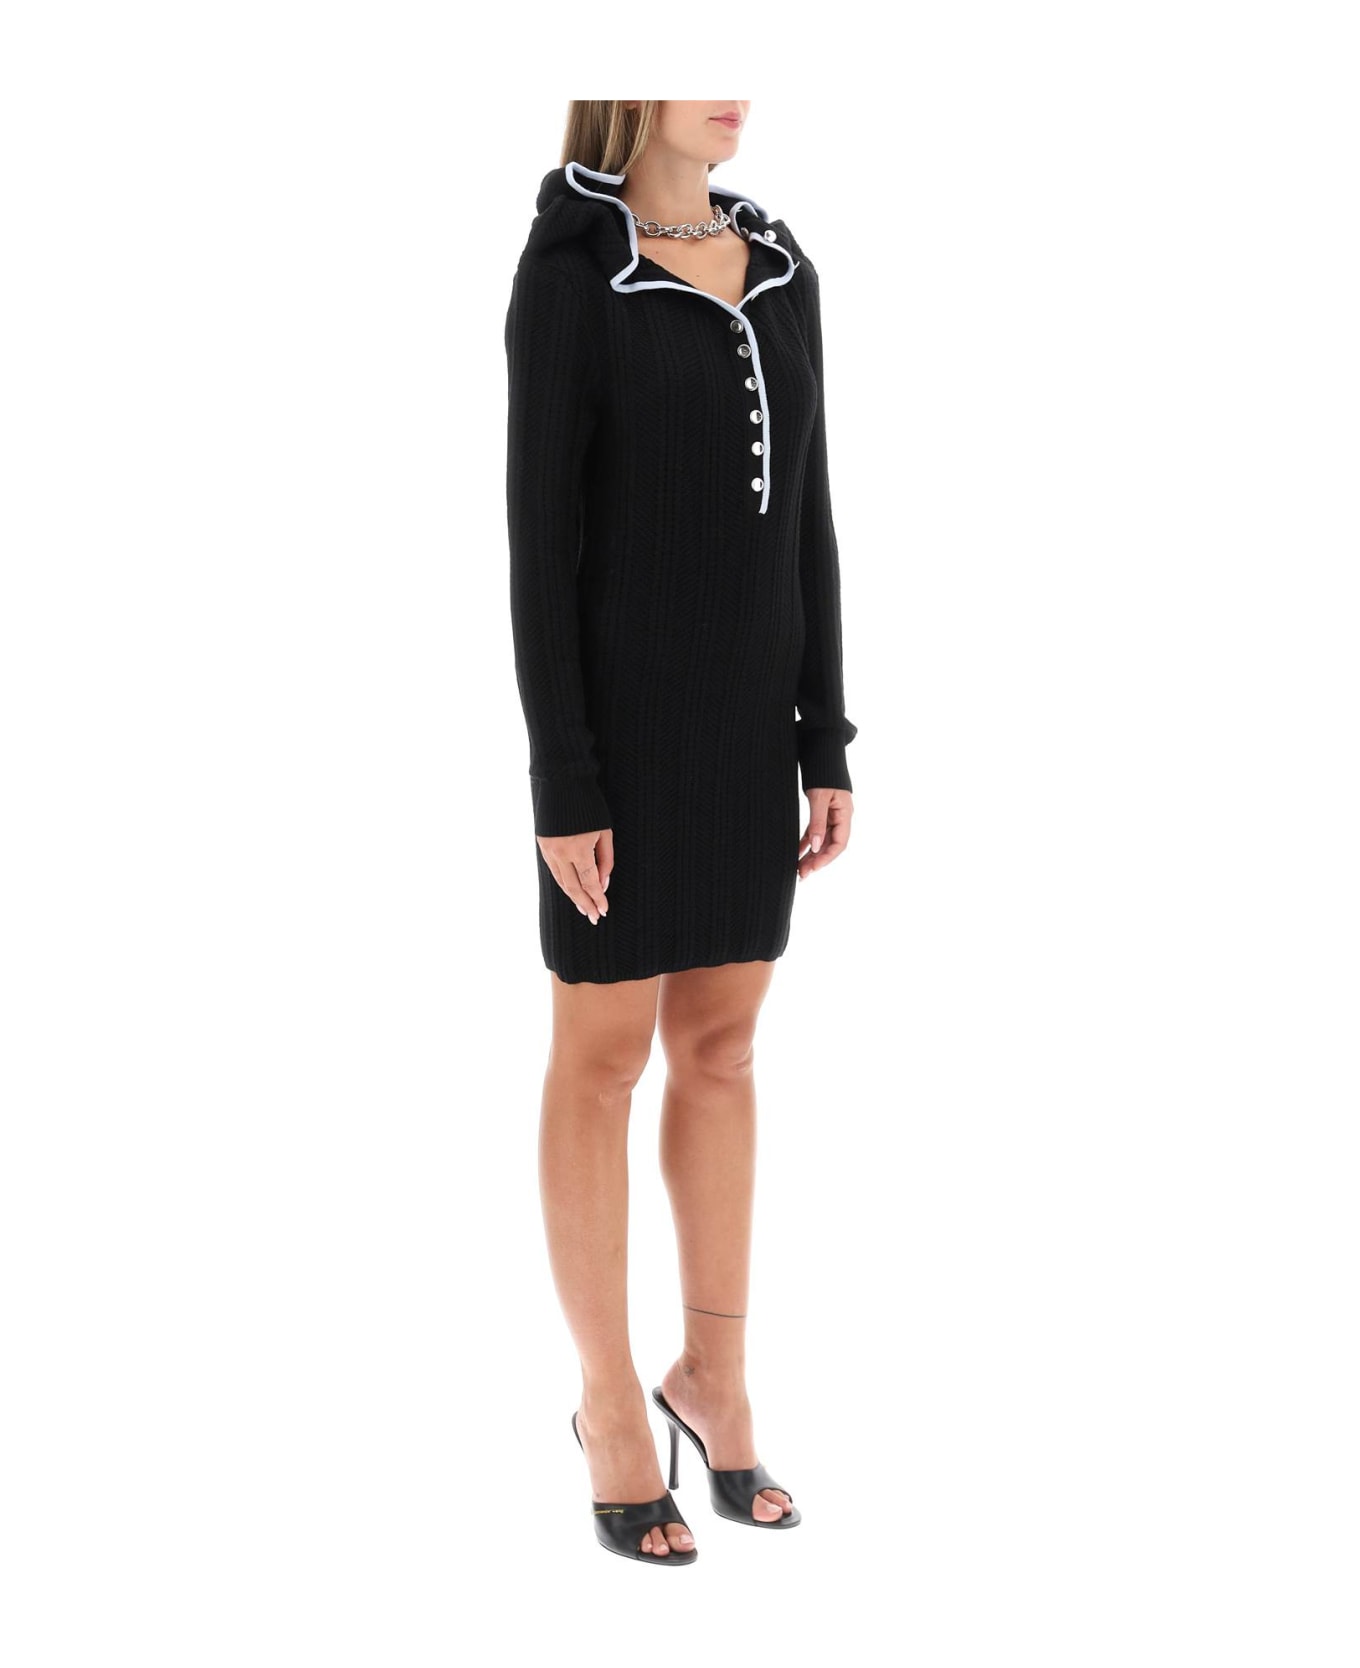 Y/Project Merino Wool Dress With Necklace - EVERGREEN BLACK (Black)